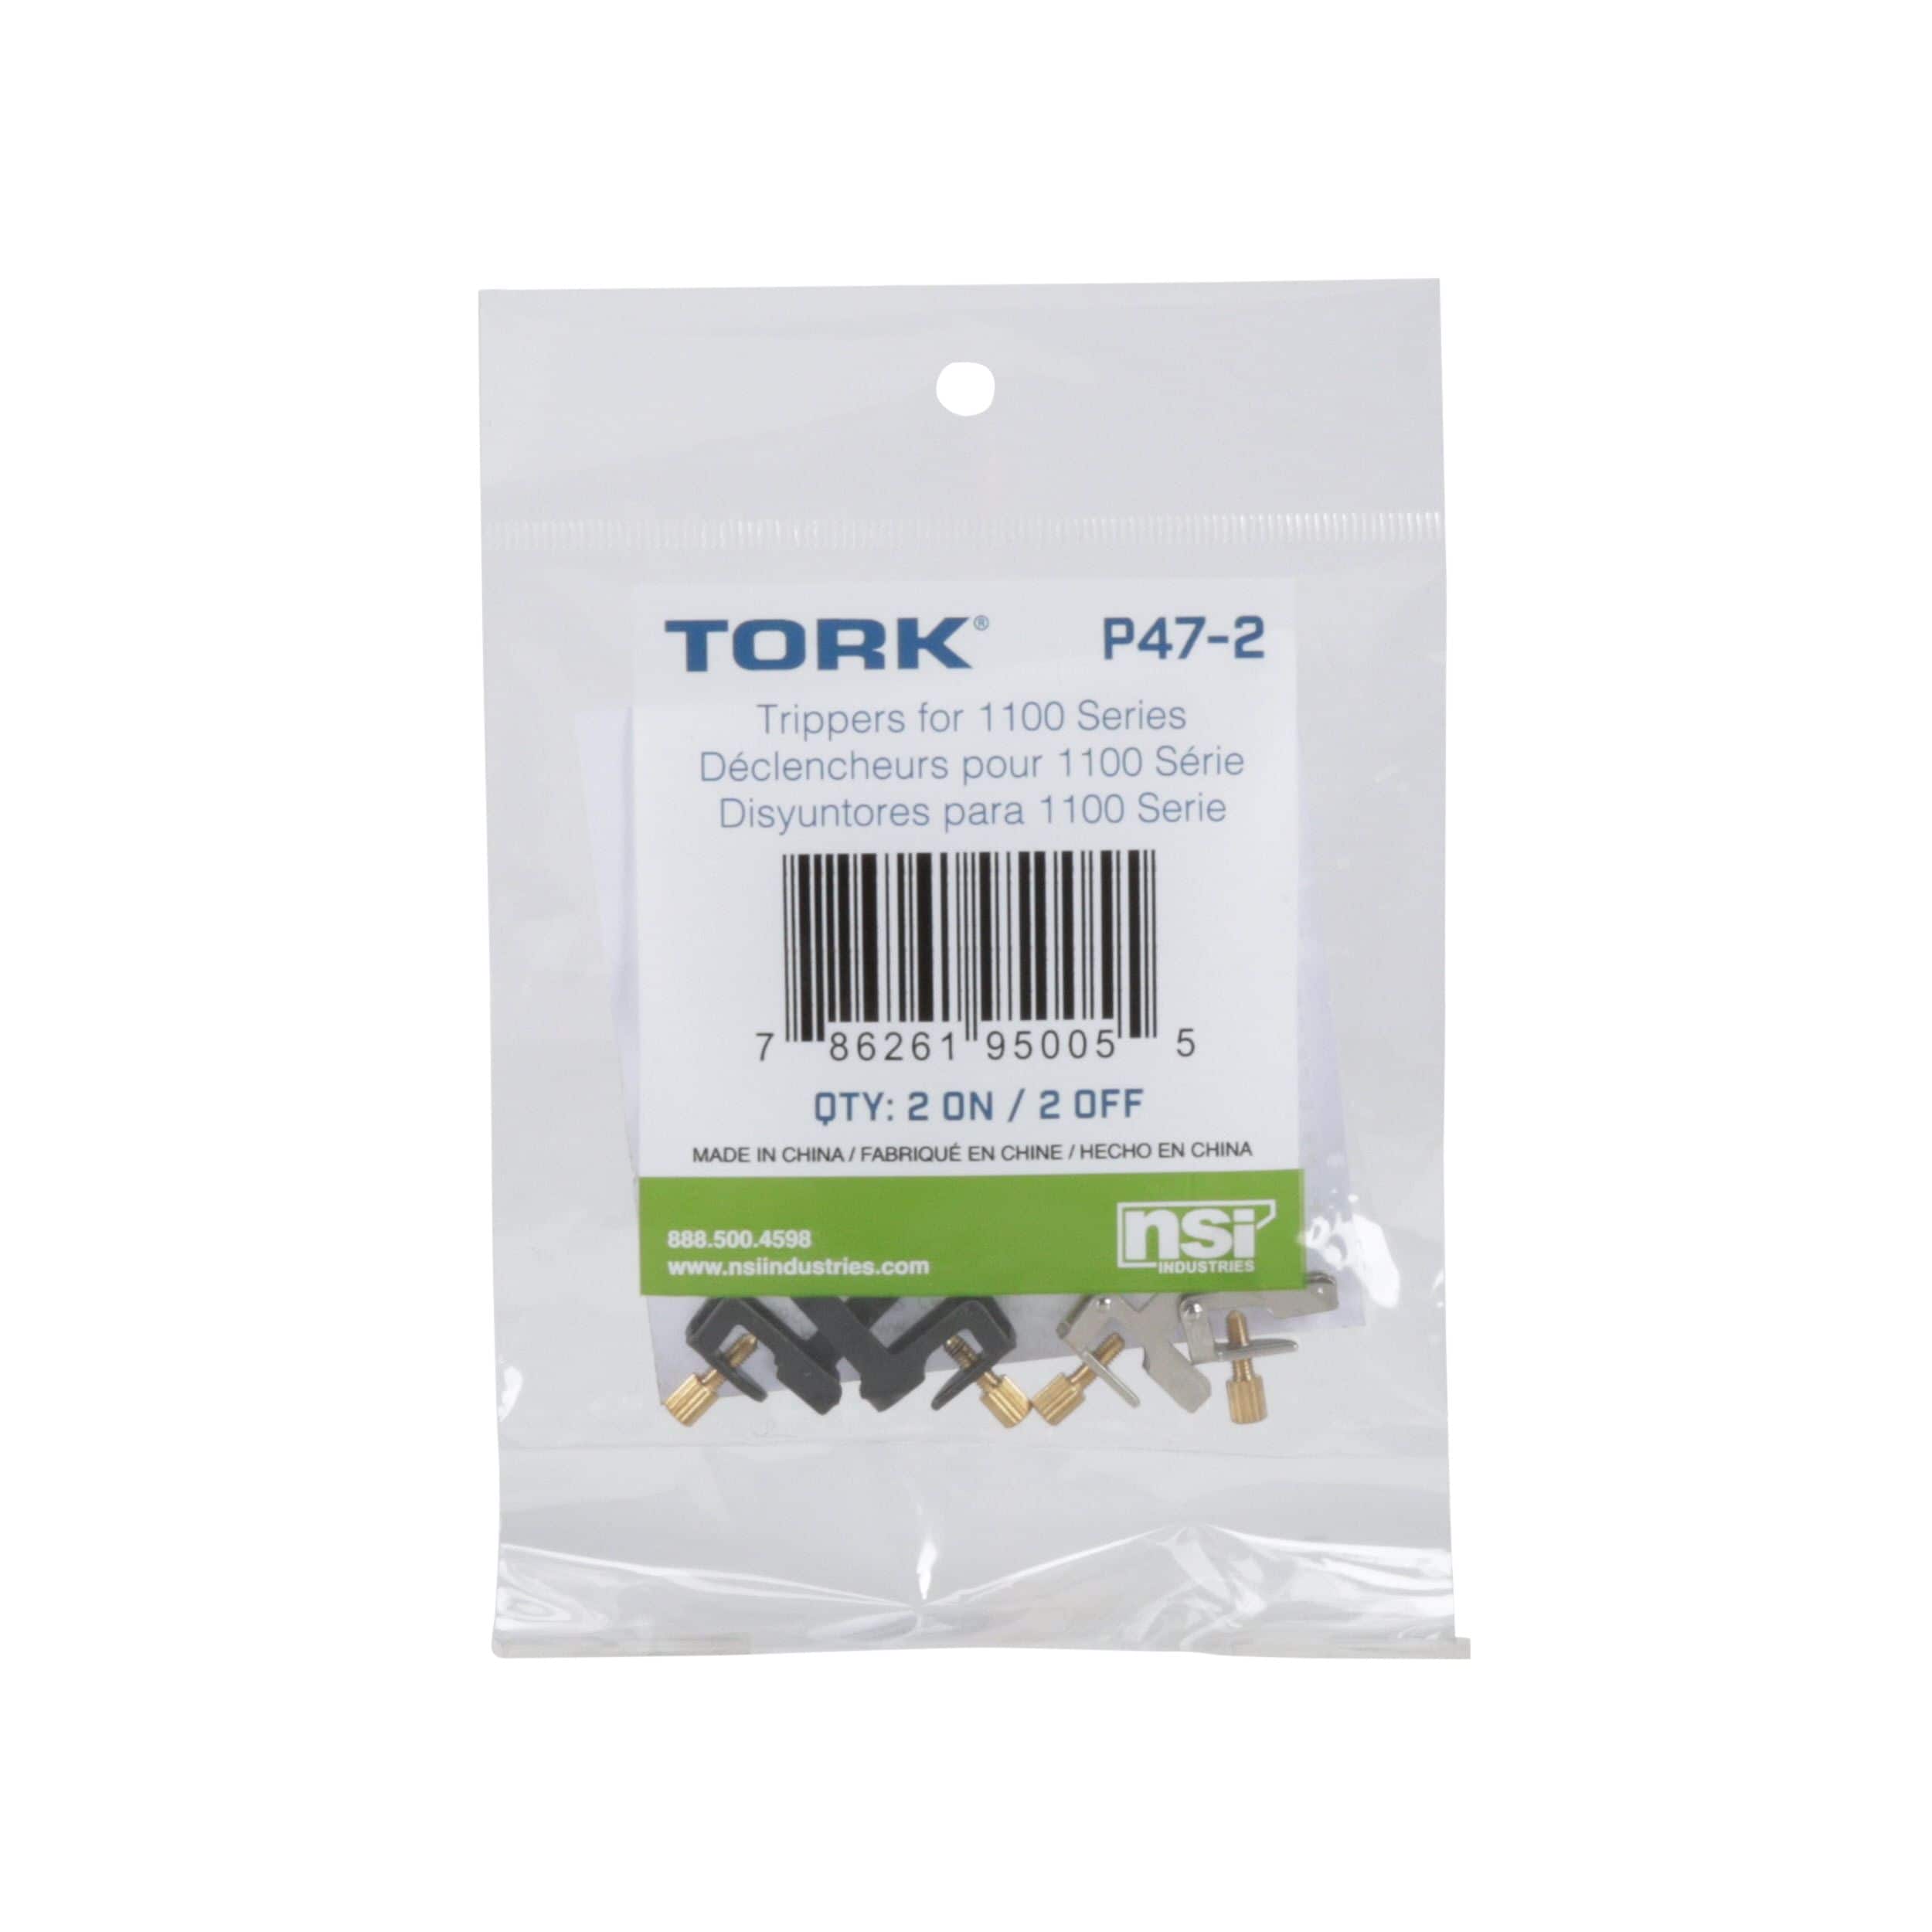 For Use With TORK Series 1100 and 7000 Timers on/off Tripper Timer Time Clock 